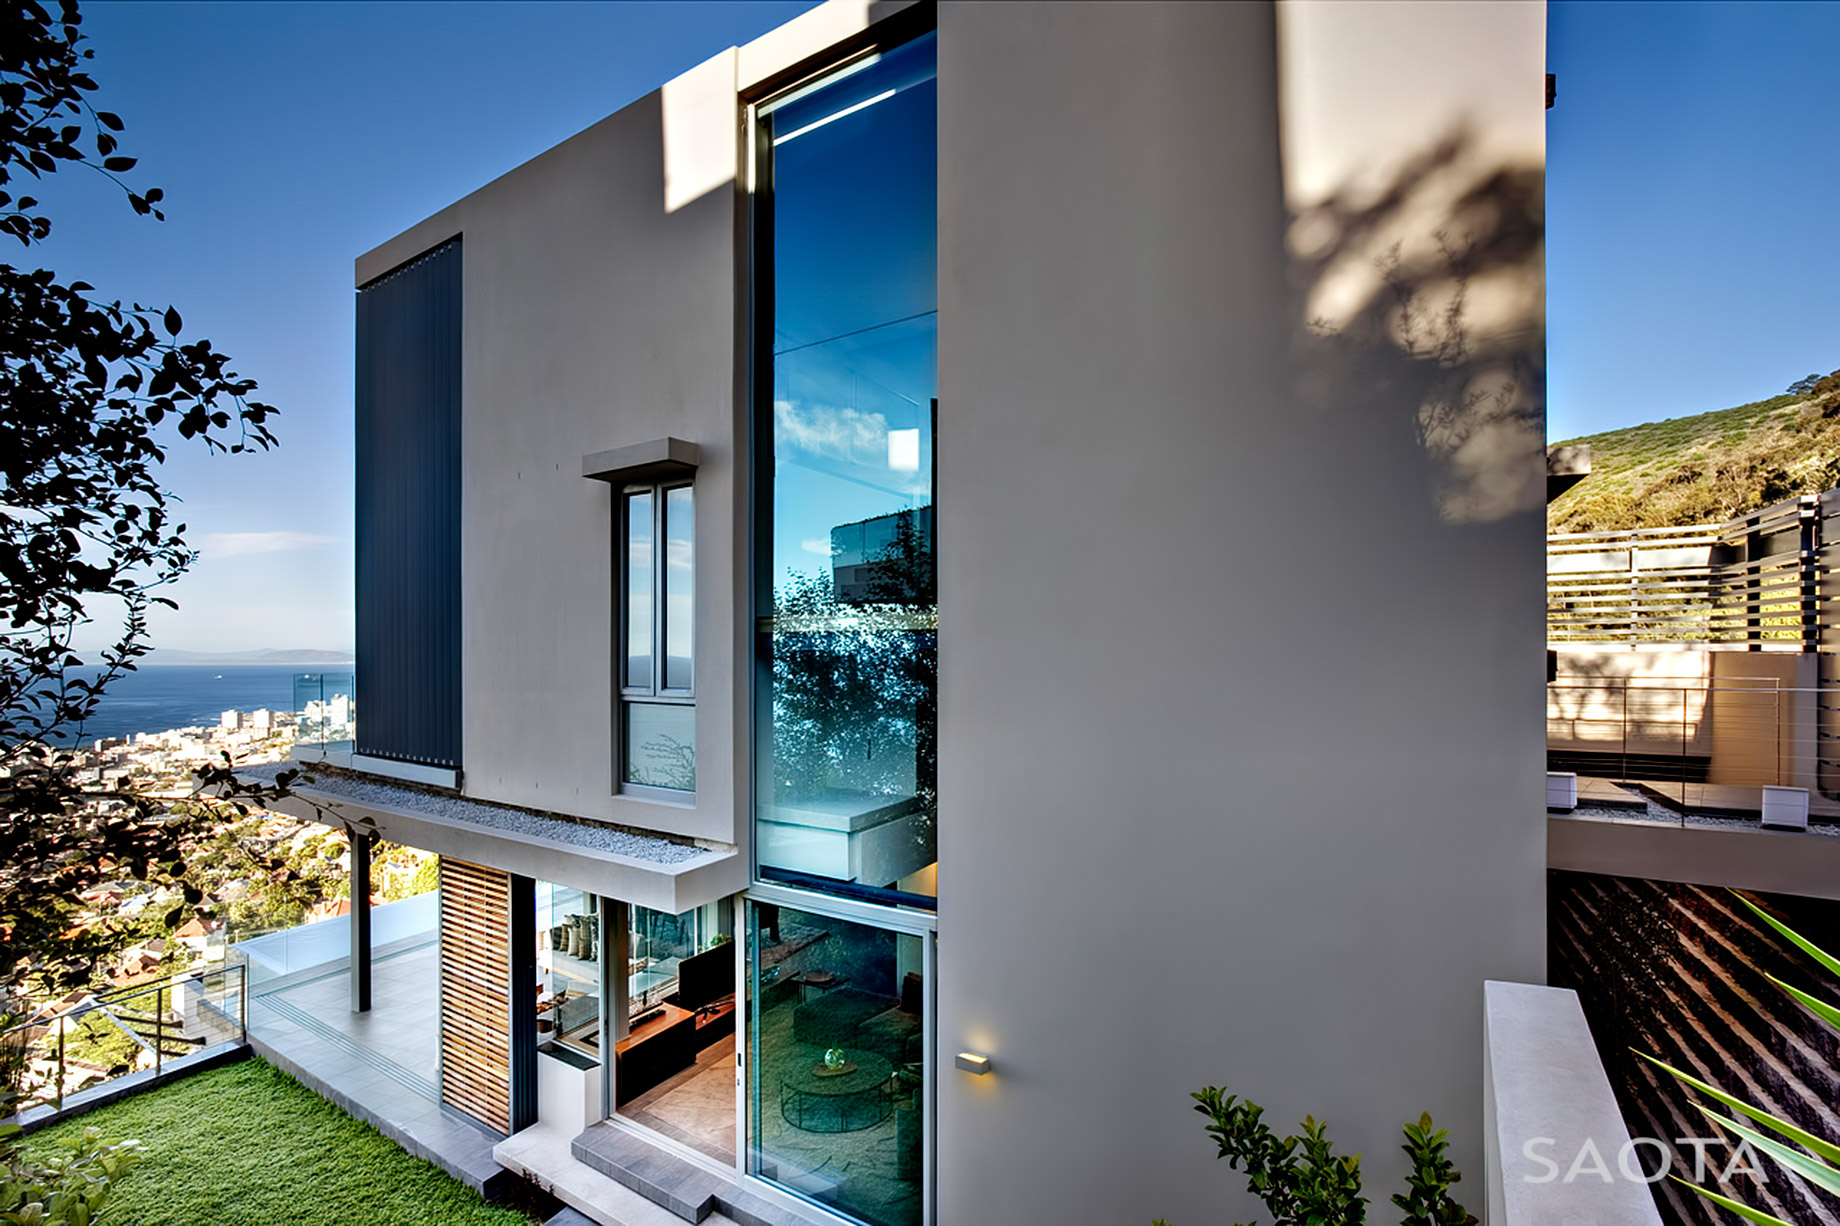 Head Road 1816 - Fresnaye, Cape Town, Western Cape, South Africa